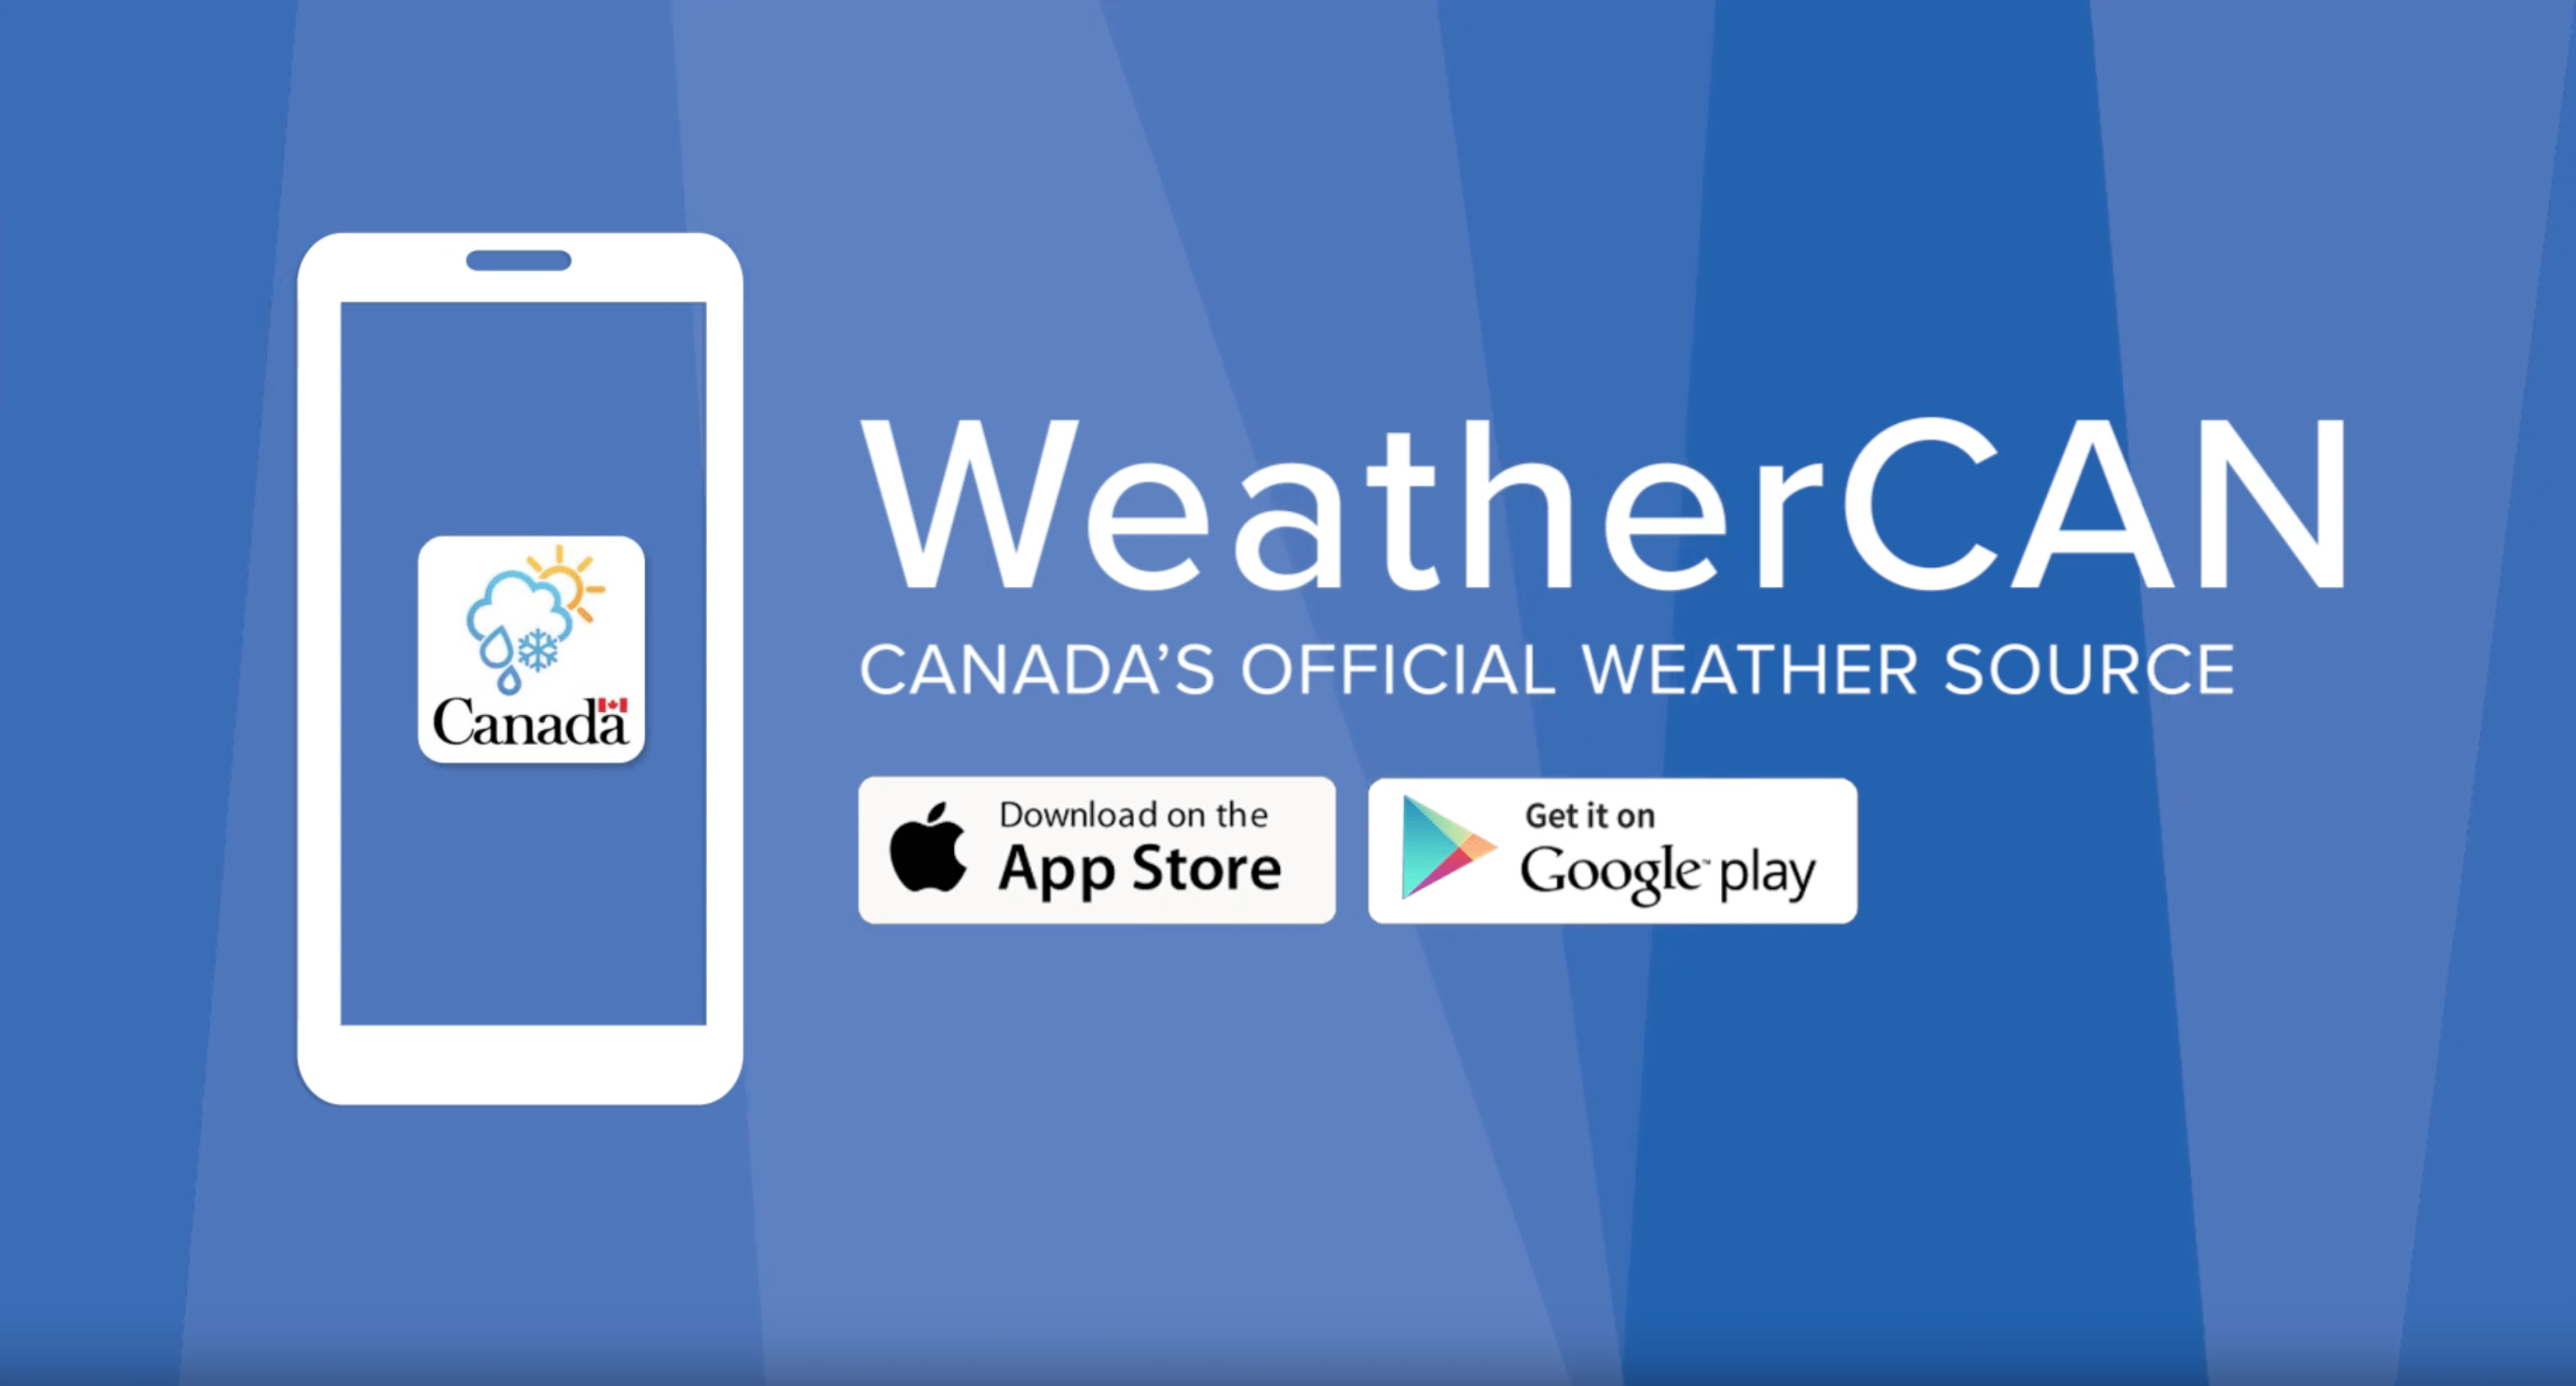 Government launches WeatherCAN weather app for mobile